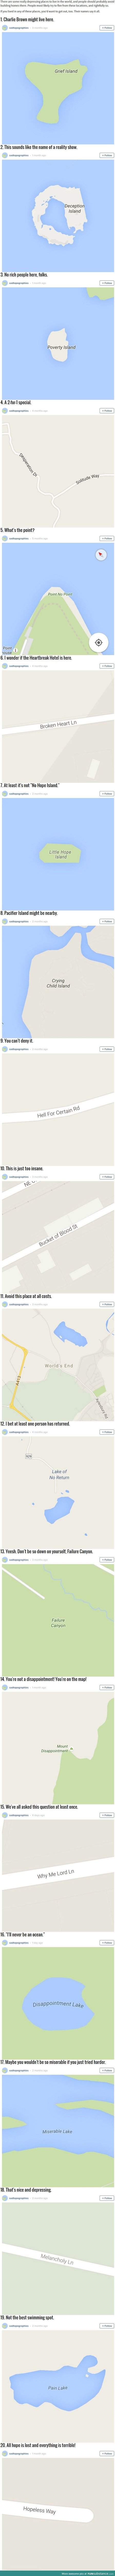 20 Places With Unfortunate Names Found On Google Maps